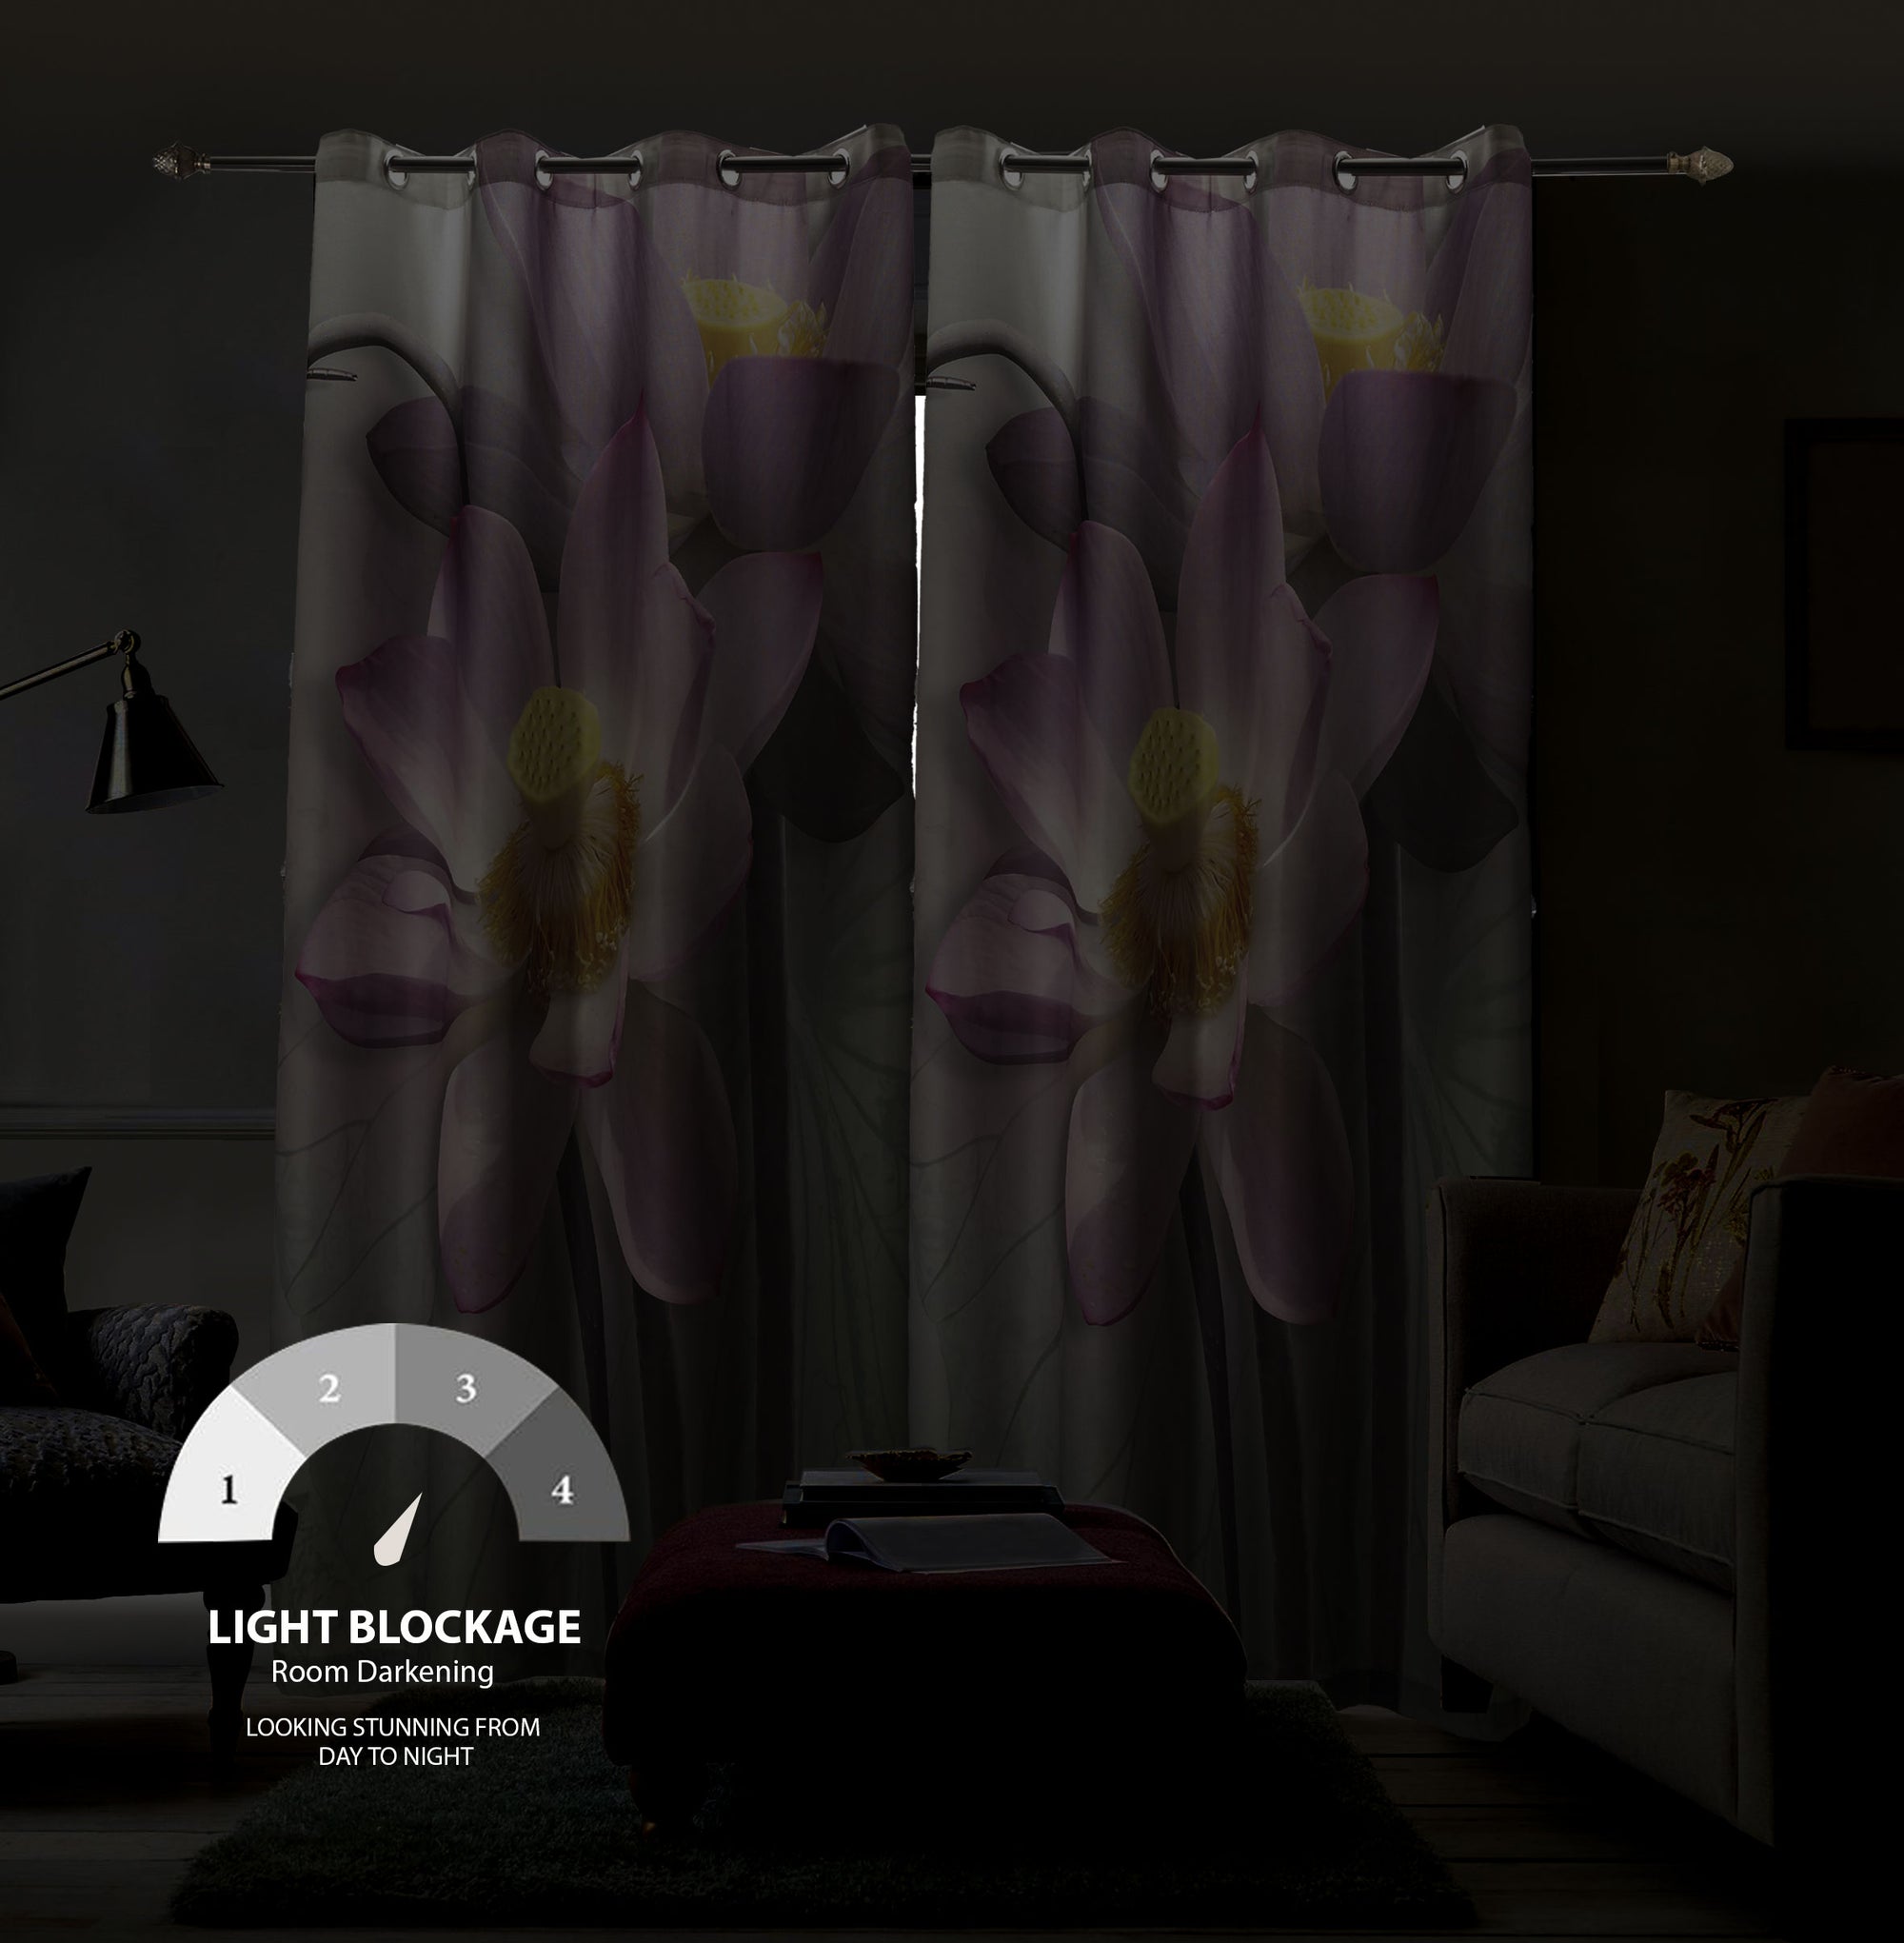 Printed Luxury Design& Curtain styles Ready Made Velvet Curtains 94 x 54 inch